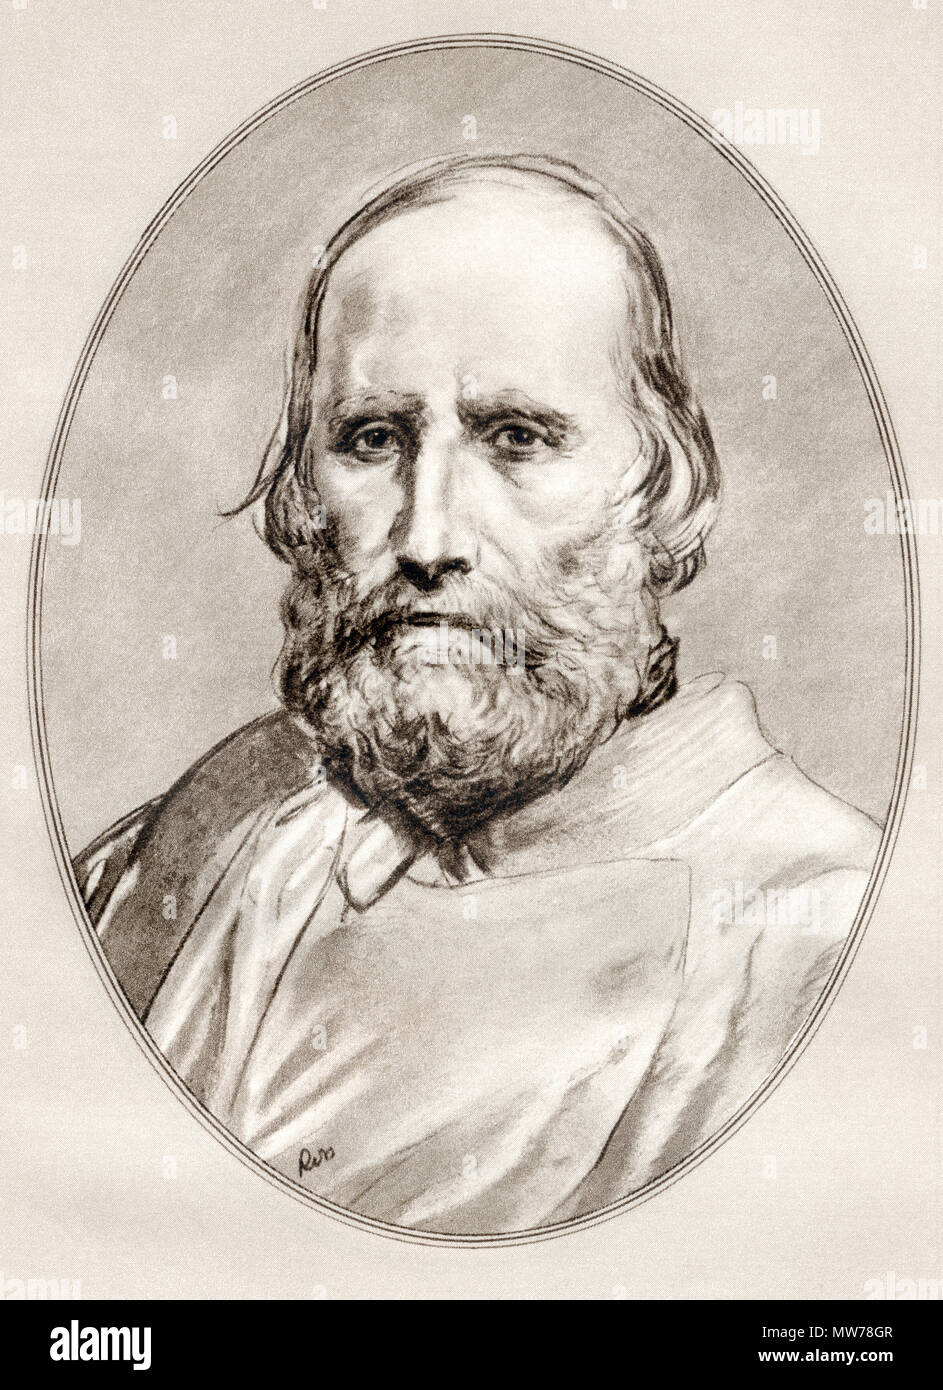 Giuseppe Garibaldi, 1807 – 1882.  Italian general, politician and nationalist.  Illustration by Gordon Ross, American artist and illustrator (1873-1946), from Living Biographies of Famous Men. Stock Photo